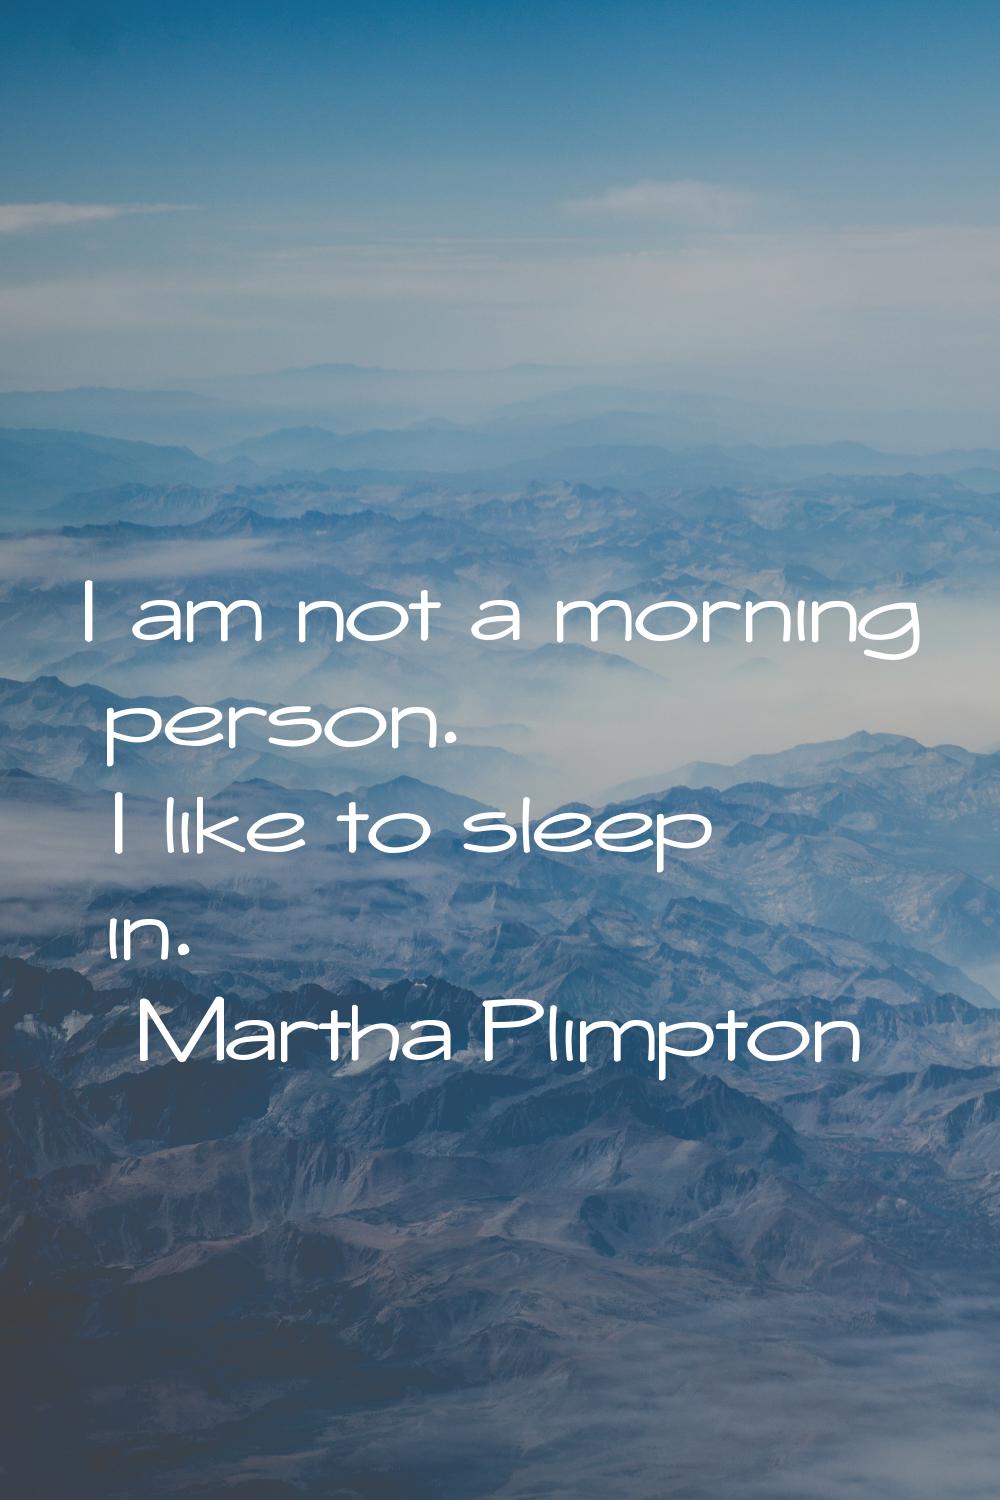 I am not a morning person. I like to sleep in.